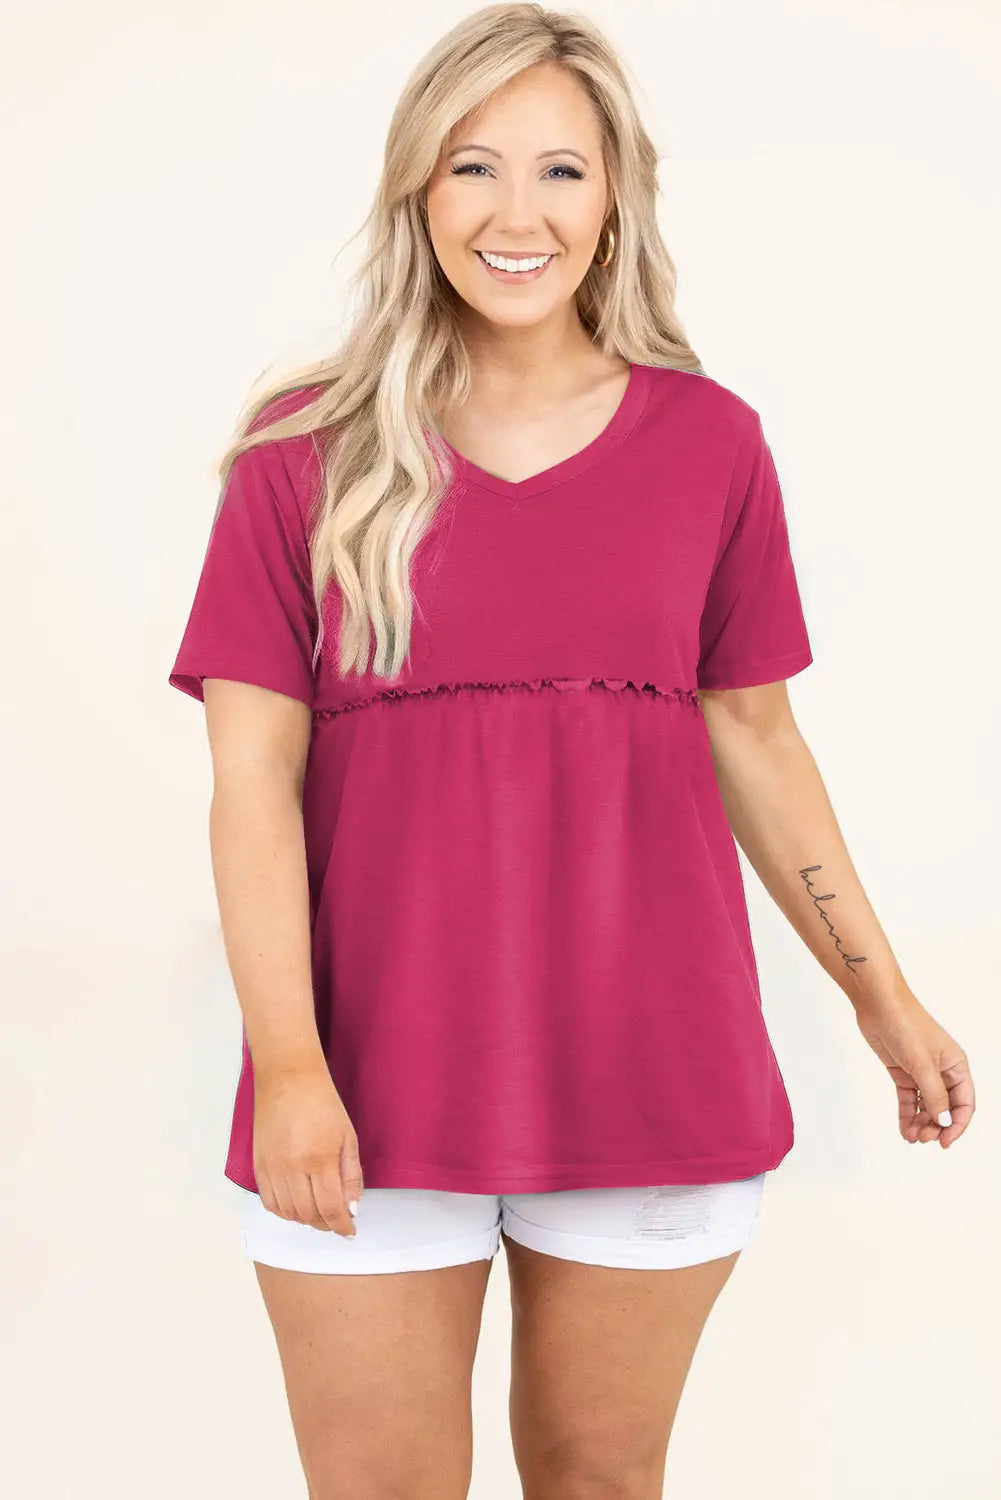 Rose red solid short sleeve flowy plus size top